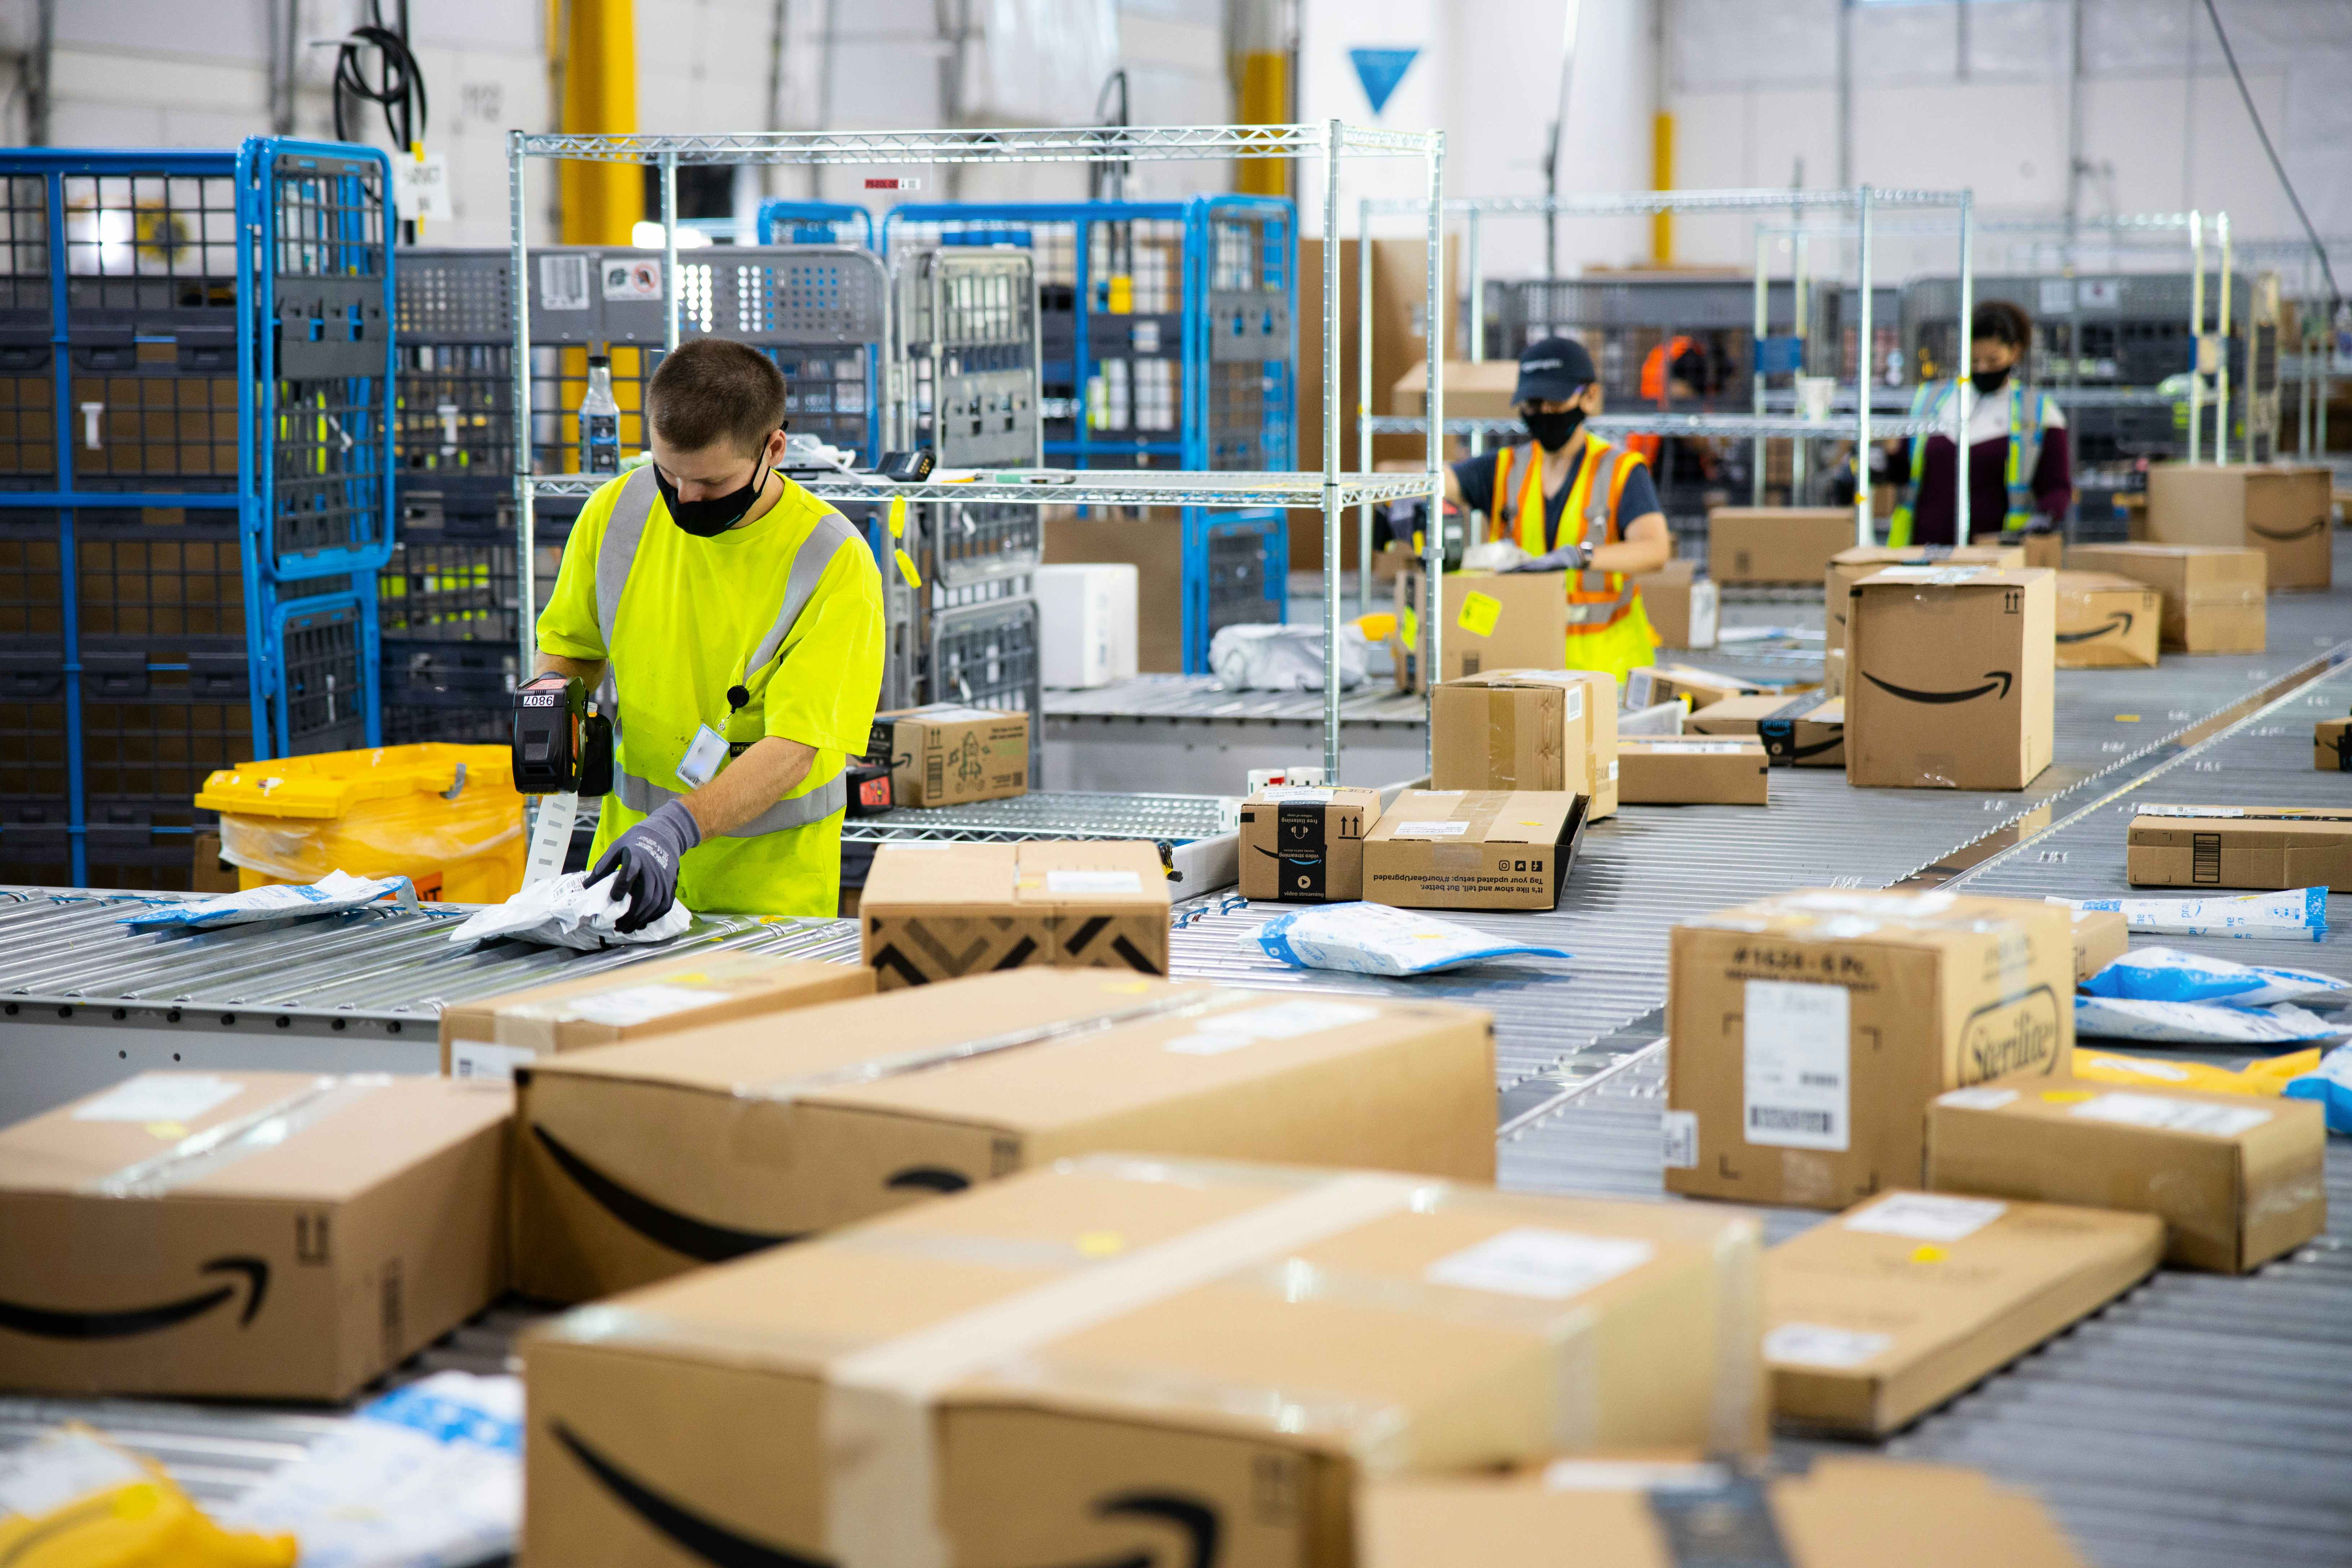 Amazon employees working in a warehouse